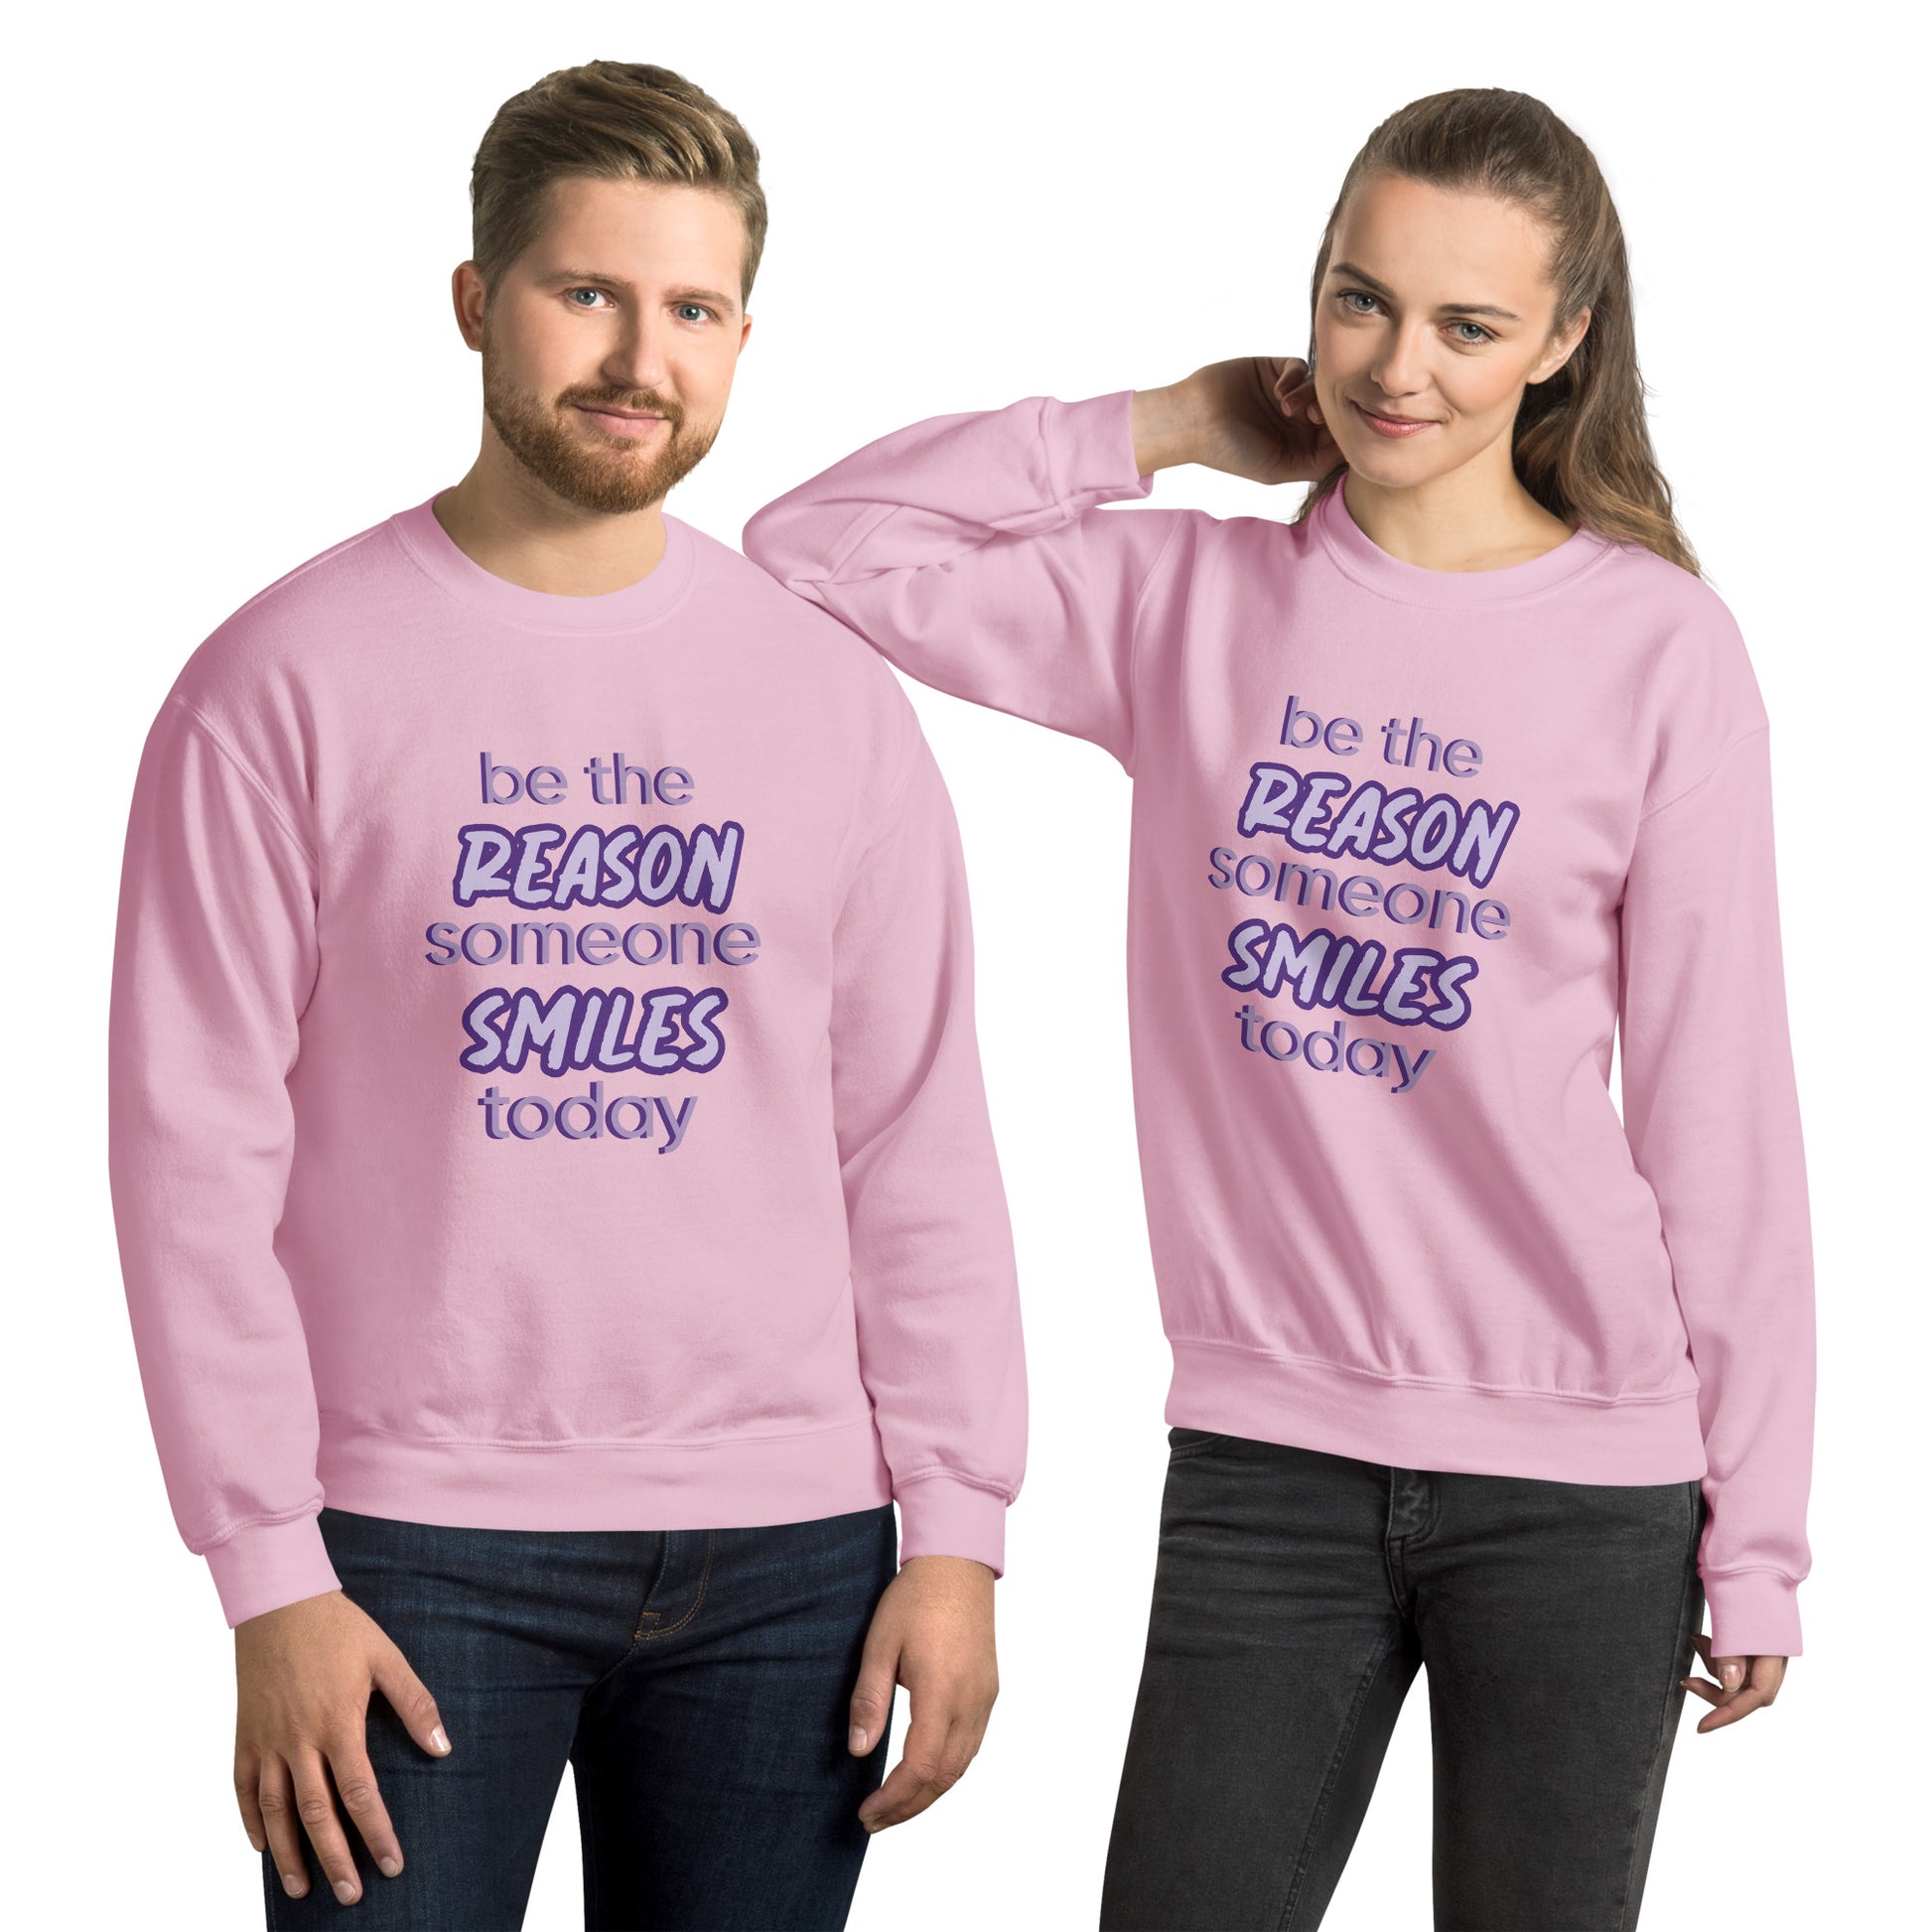 Men and women with light pink sweater and the quote "be the reason someone smiles today" in purple on it. 